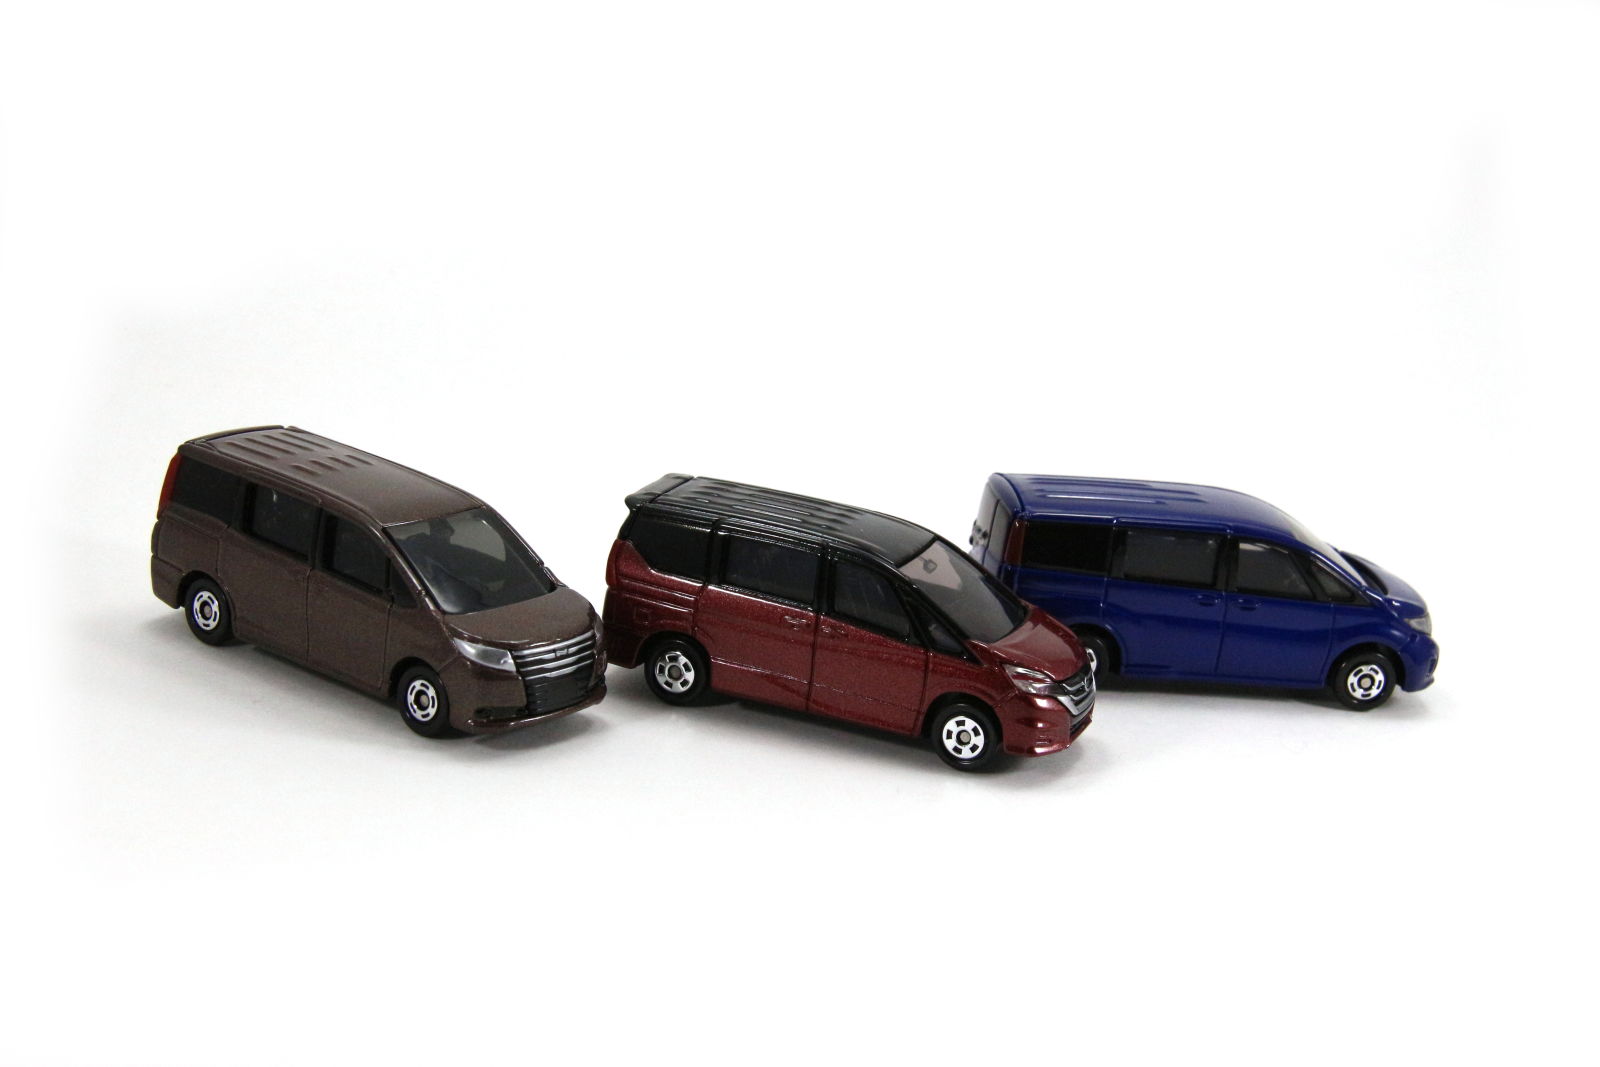 Illustration for article titled Land of the Rising Sunday: Minivans of Japan